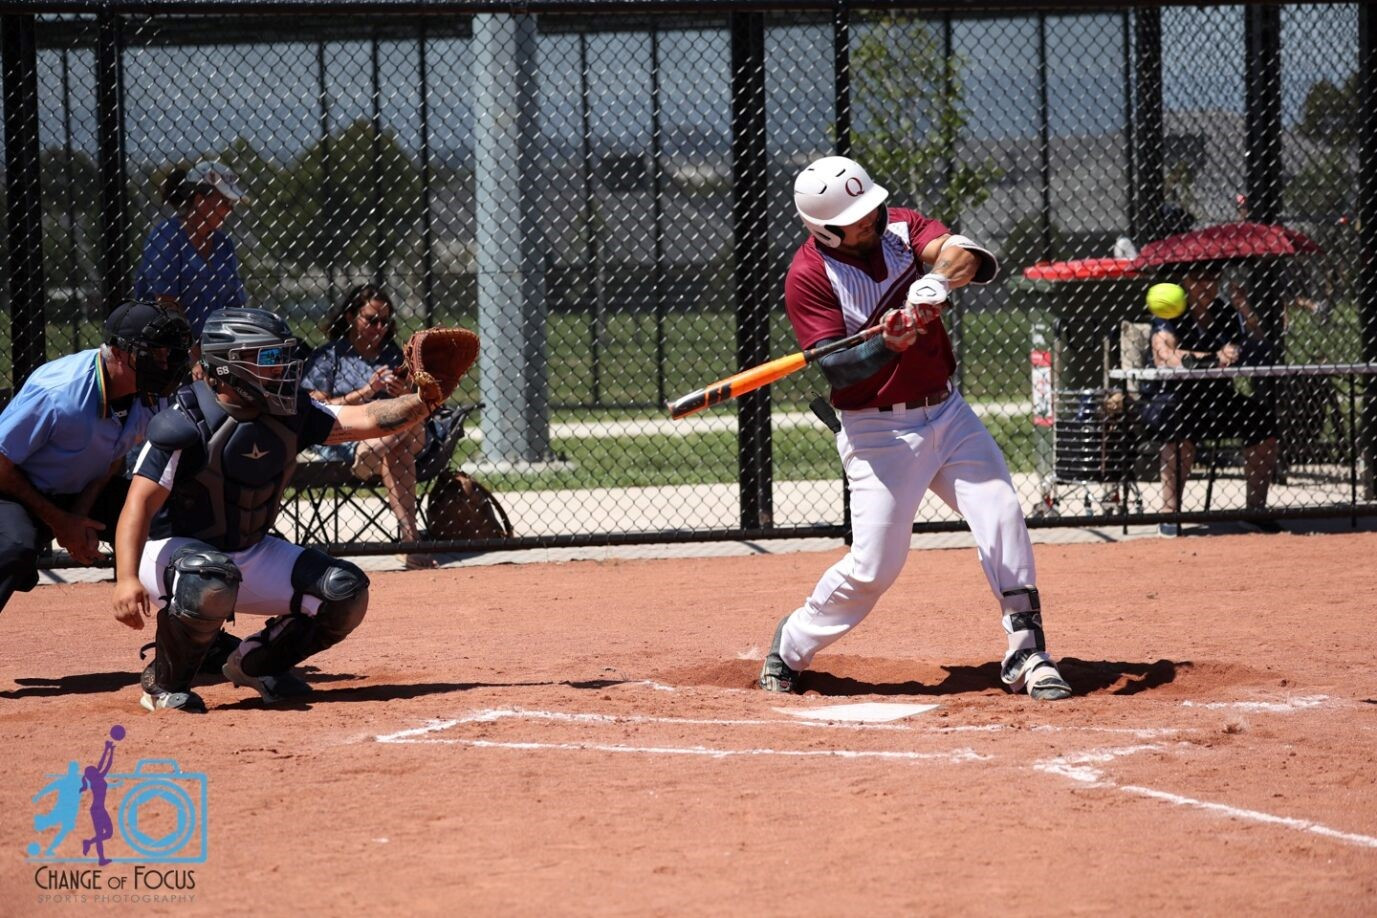 Jaiden Holly’s first time in the U23 men’s softball championships was one to remember, as he was part of the Queensland team which won the main prize.